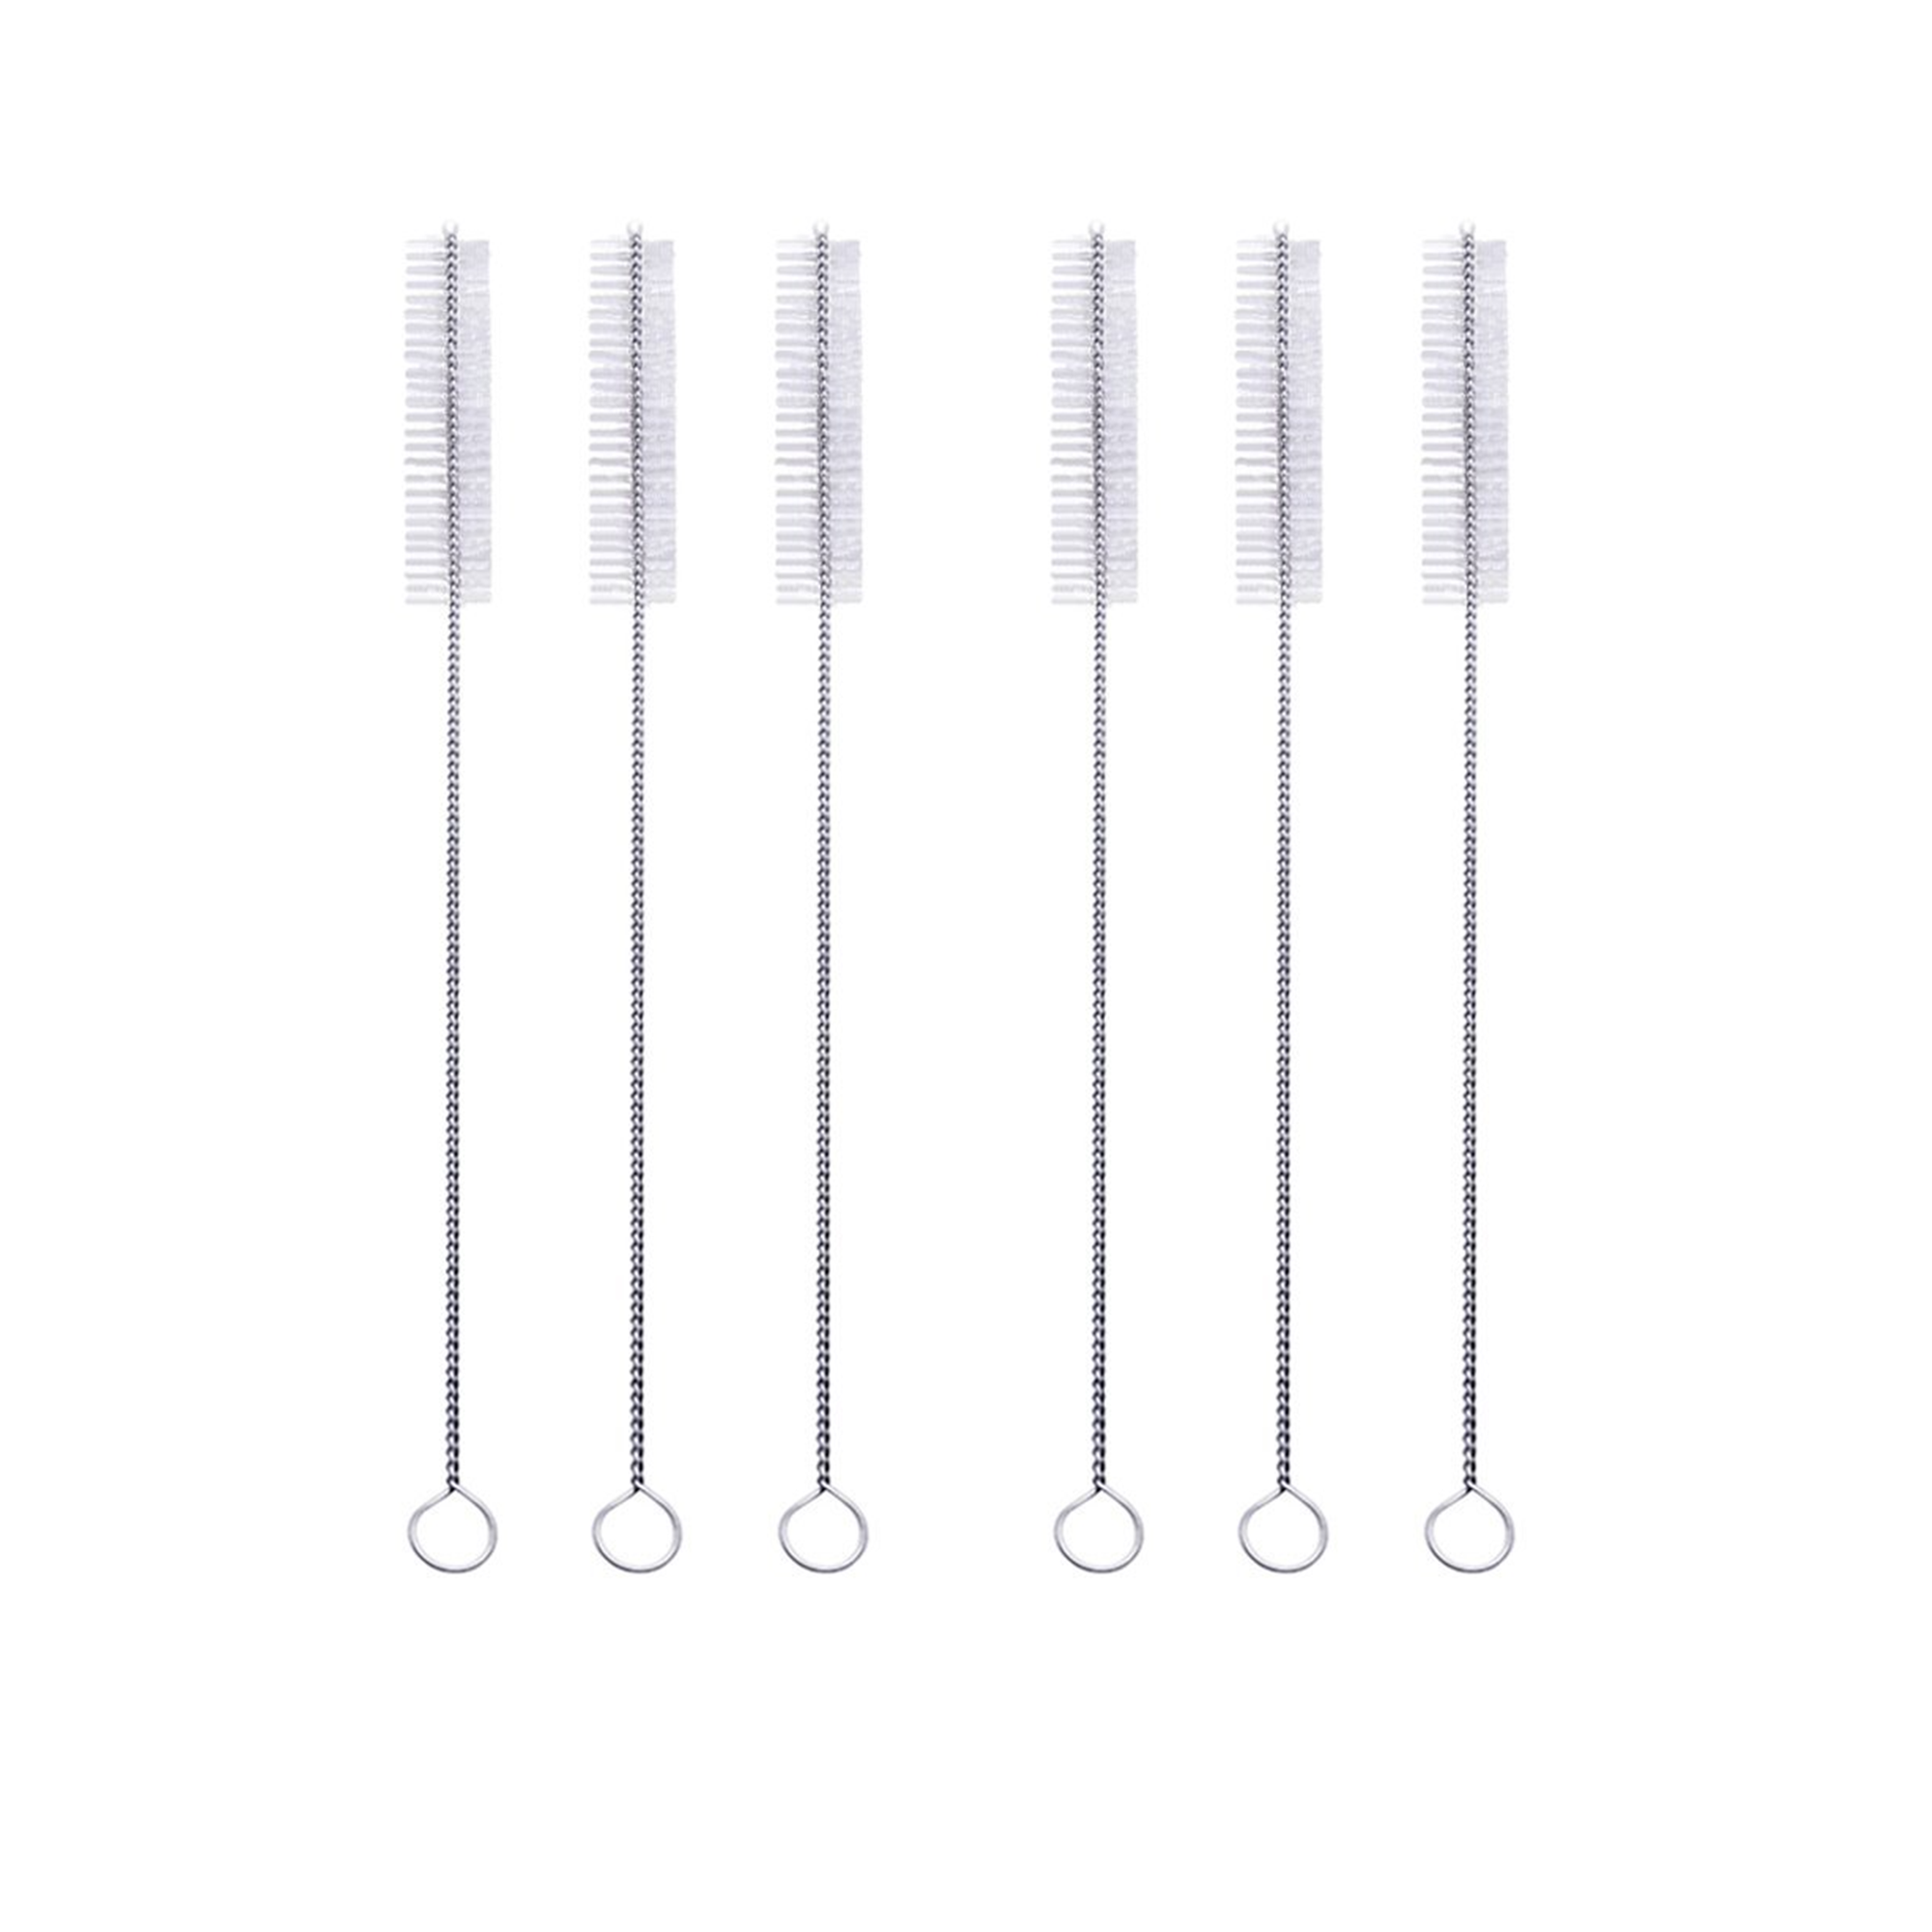 SWZLE Drinking Straws - Cleaning Brush (6 Pack)